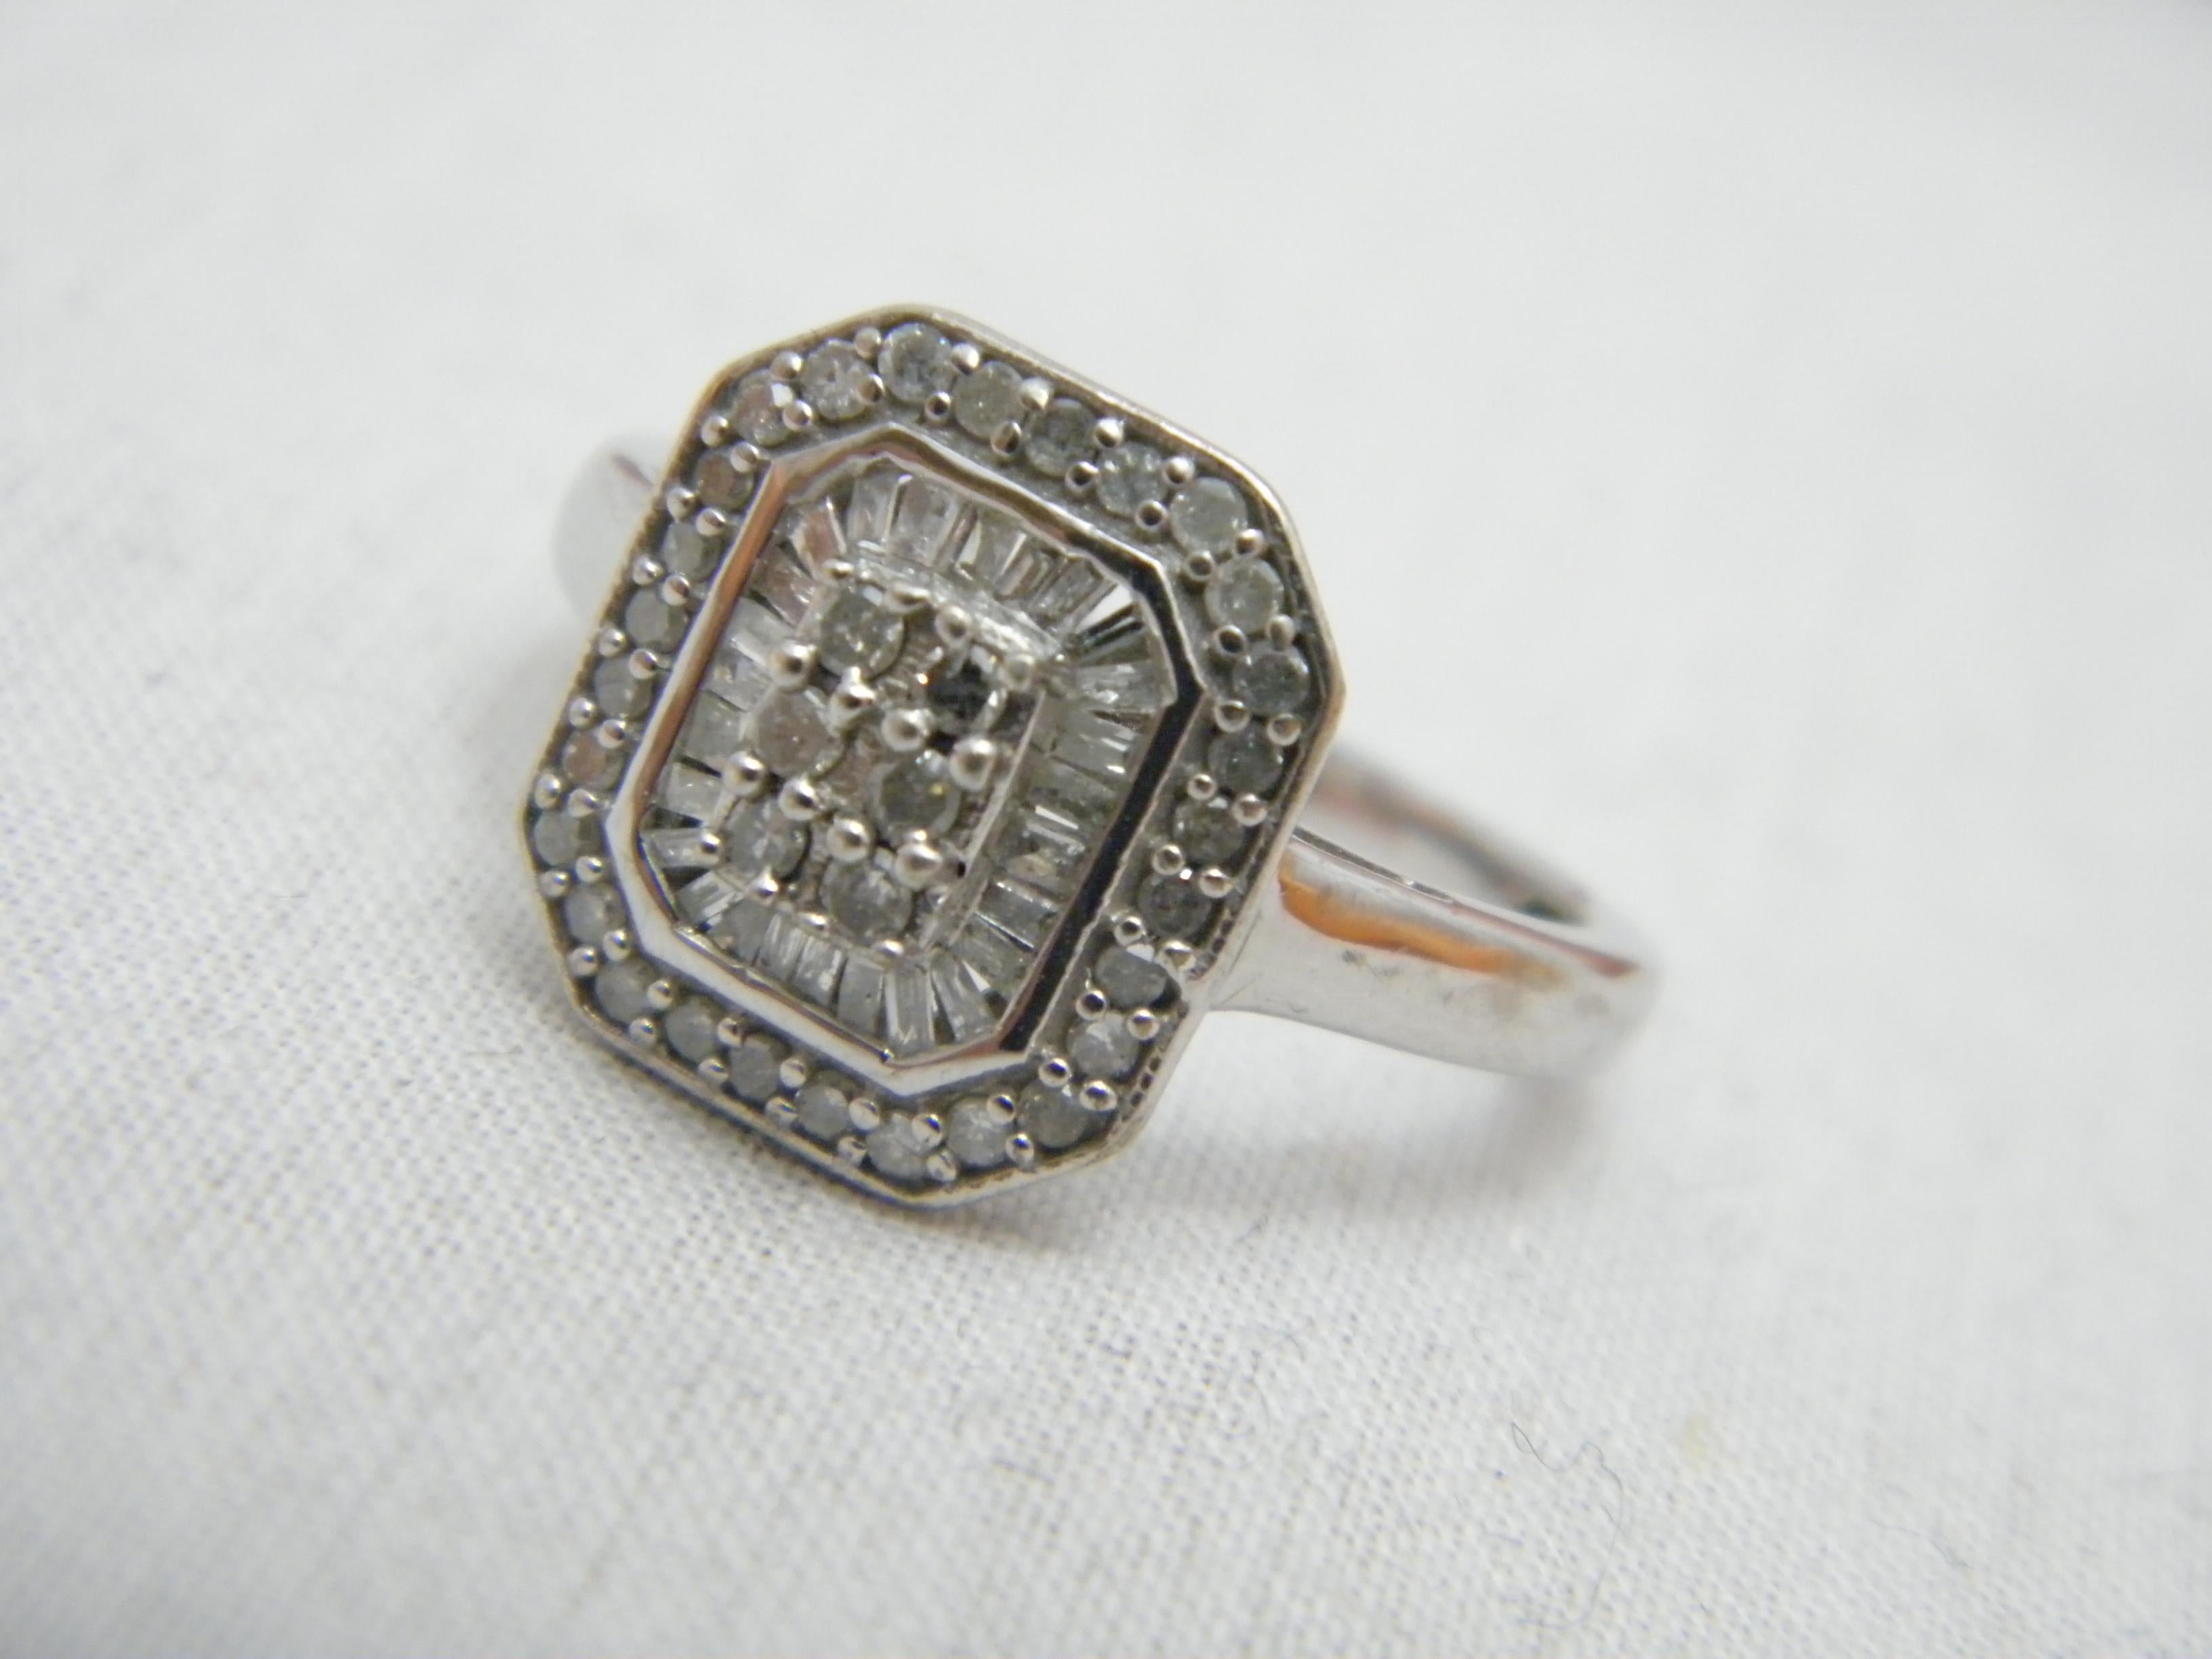 If you have landed on this page then you have an eye for beauty.

On offer is this gorgeous
STERLING SILVER 1.25 CTTW DIAMOND CLUSTER SIGNET RING

DETAILS
Material: Sterling Silver
Style: Statement unusual signet ring with sparkling stones
Gems: